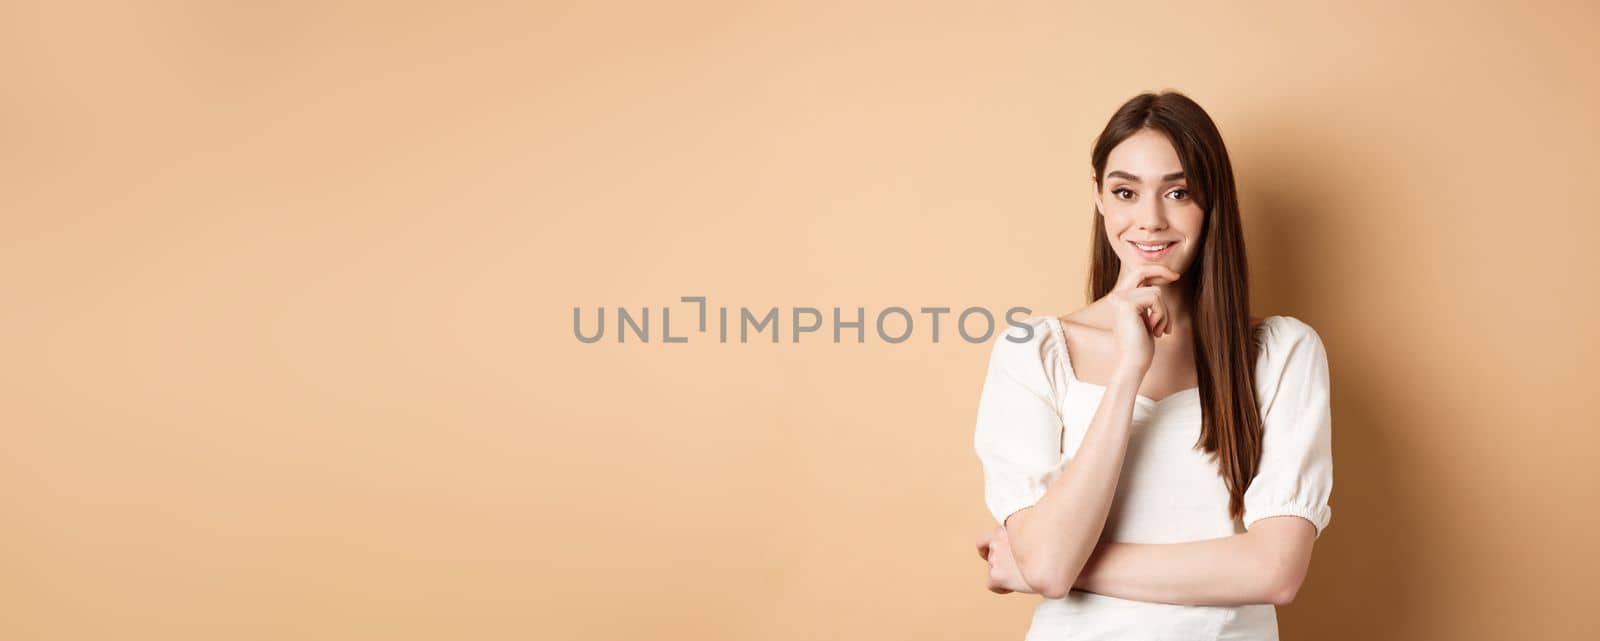 Smiling young european woman in dress, having an idea, listening with interest, touching chin and looking at camera intrigued, standing against beige background.